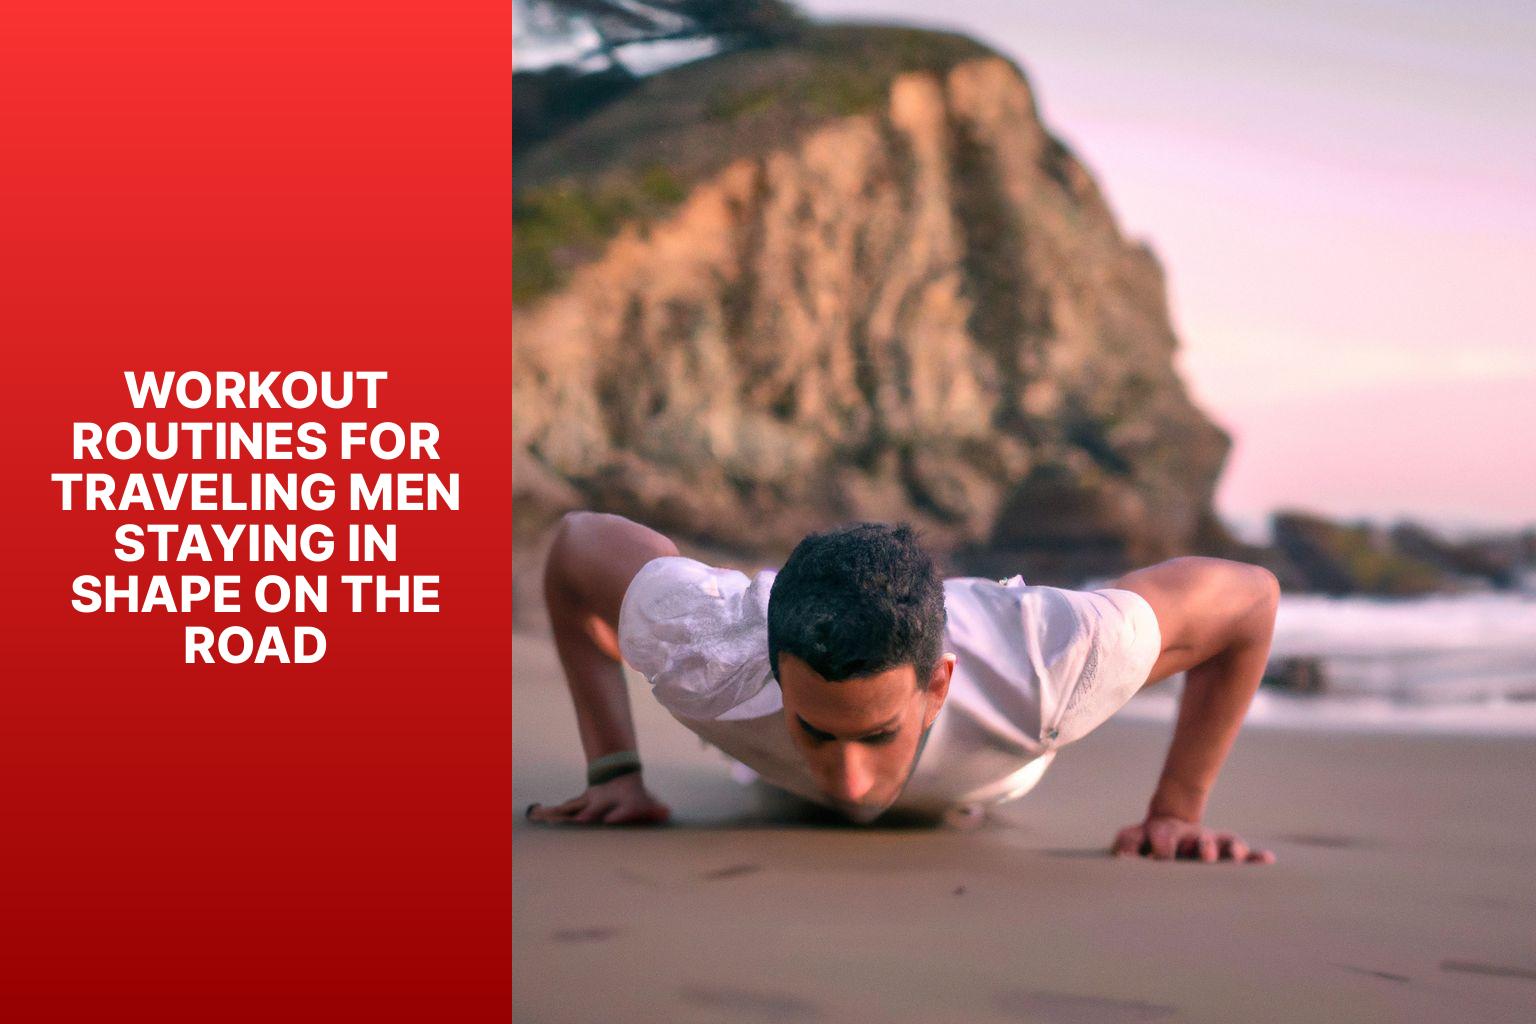 Workout Routines for Traveling Men: Staying in Shape on the Road